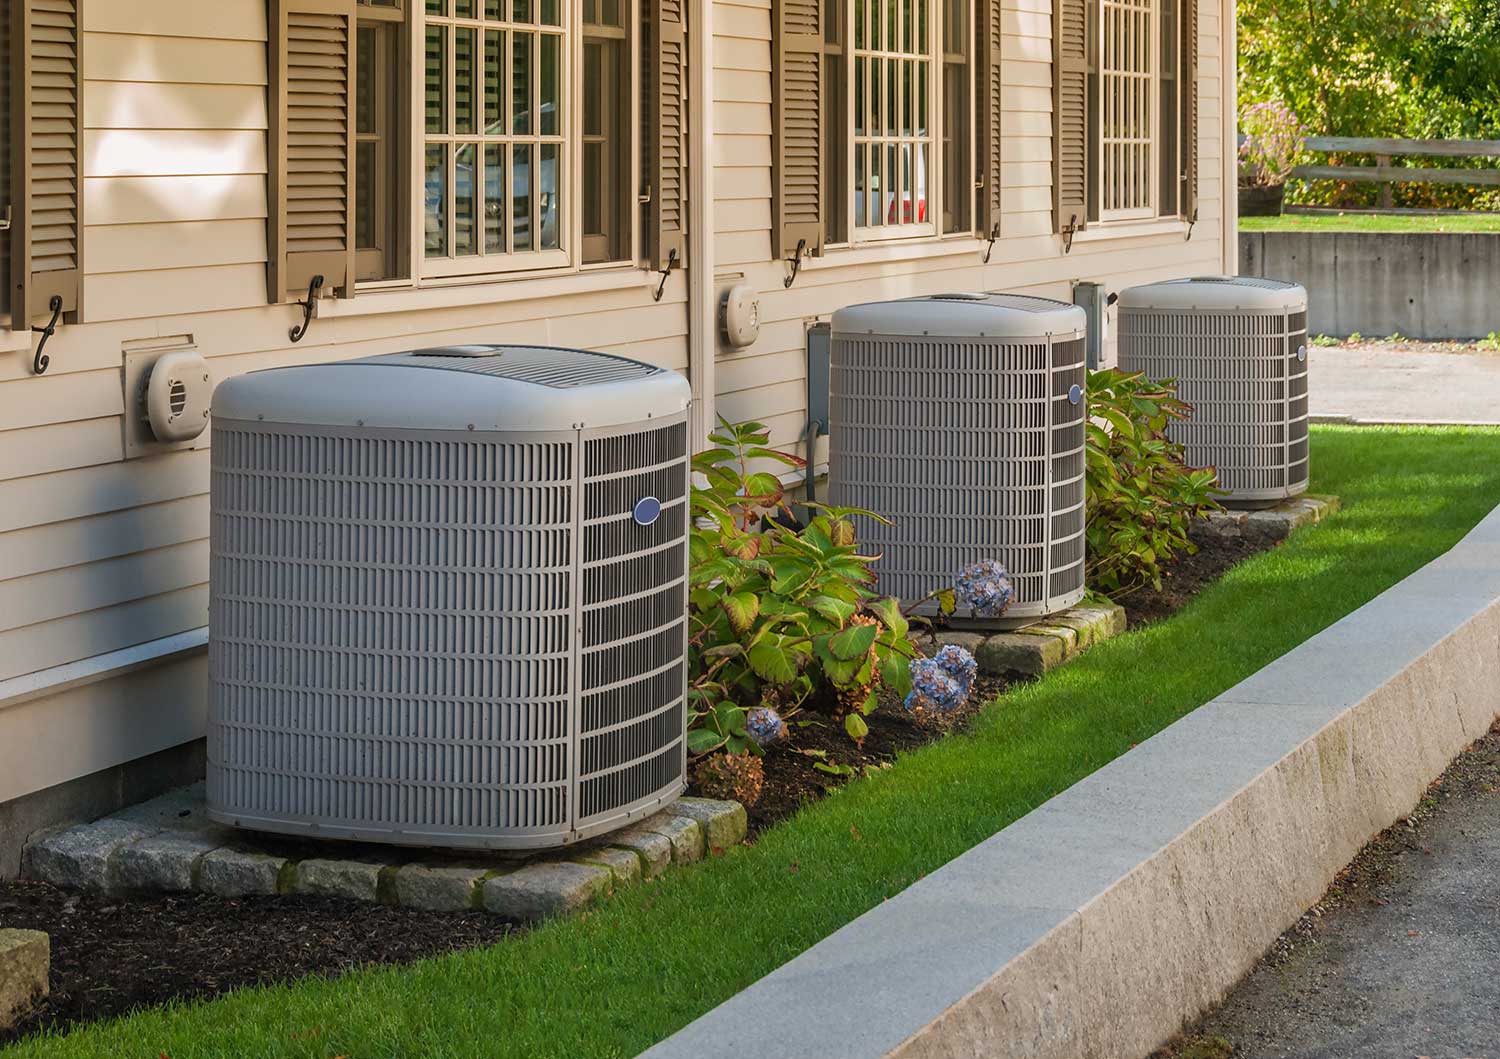 Heating, Ventilation, as well as A/C savings add up